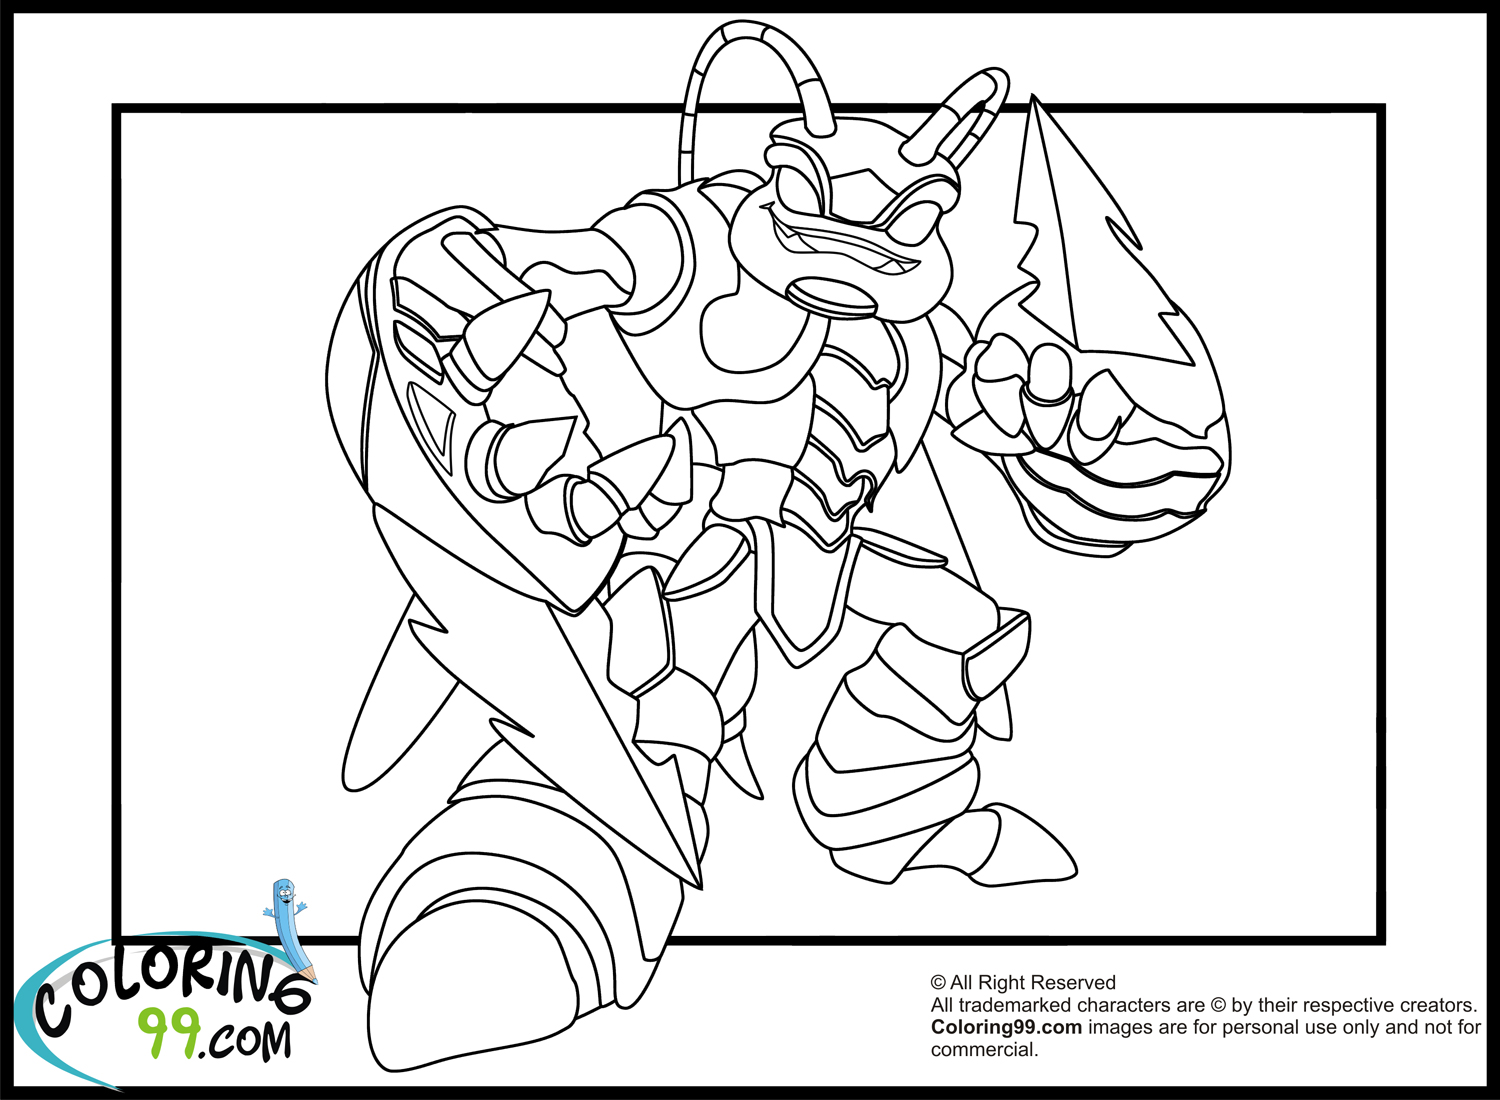 Skylanders Giants Coloring Pages | Minister Coloring